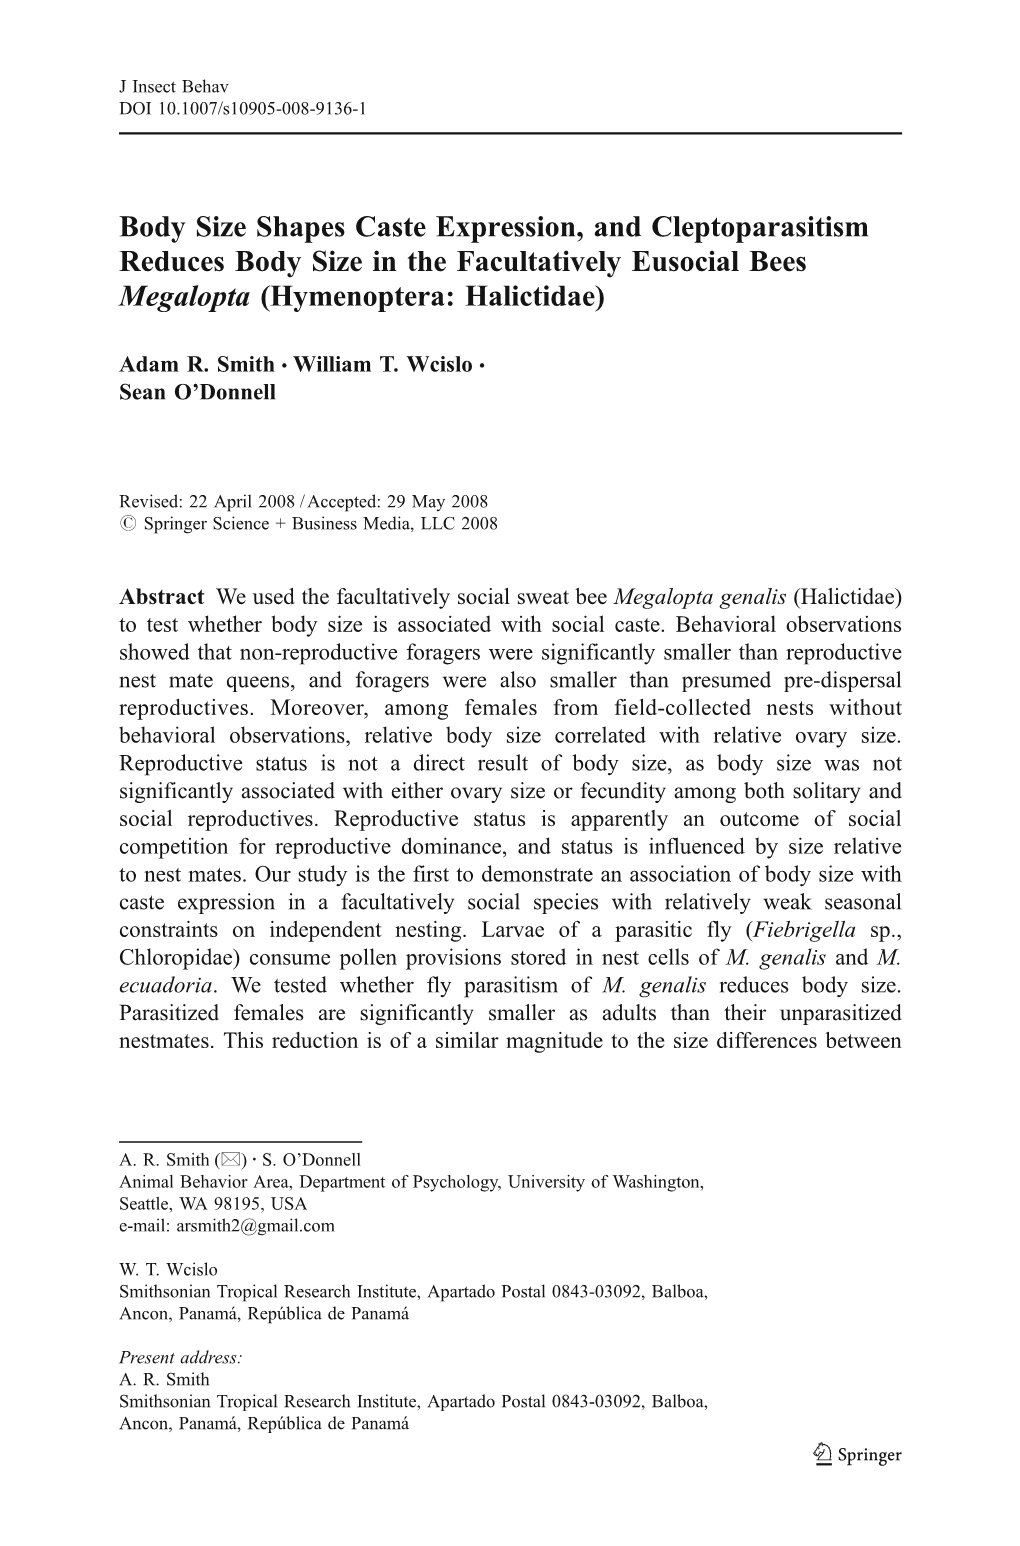 Body Size Shapes Caste Expression, and Cleptoparasitism Reduces Body Size in the Facultatively Eusocial Bees Megalopta (Hymenoptera: Halictidae)